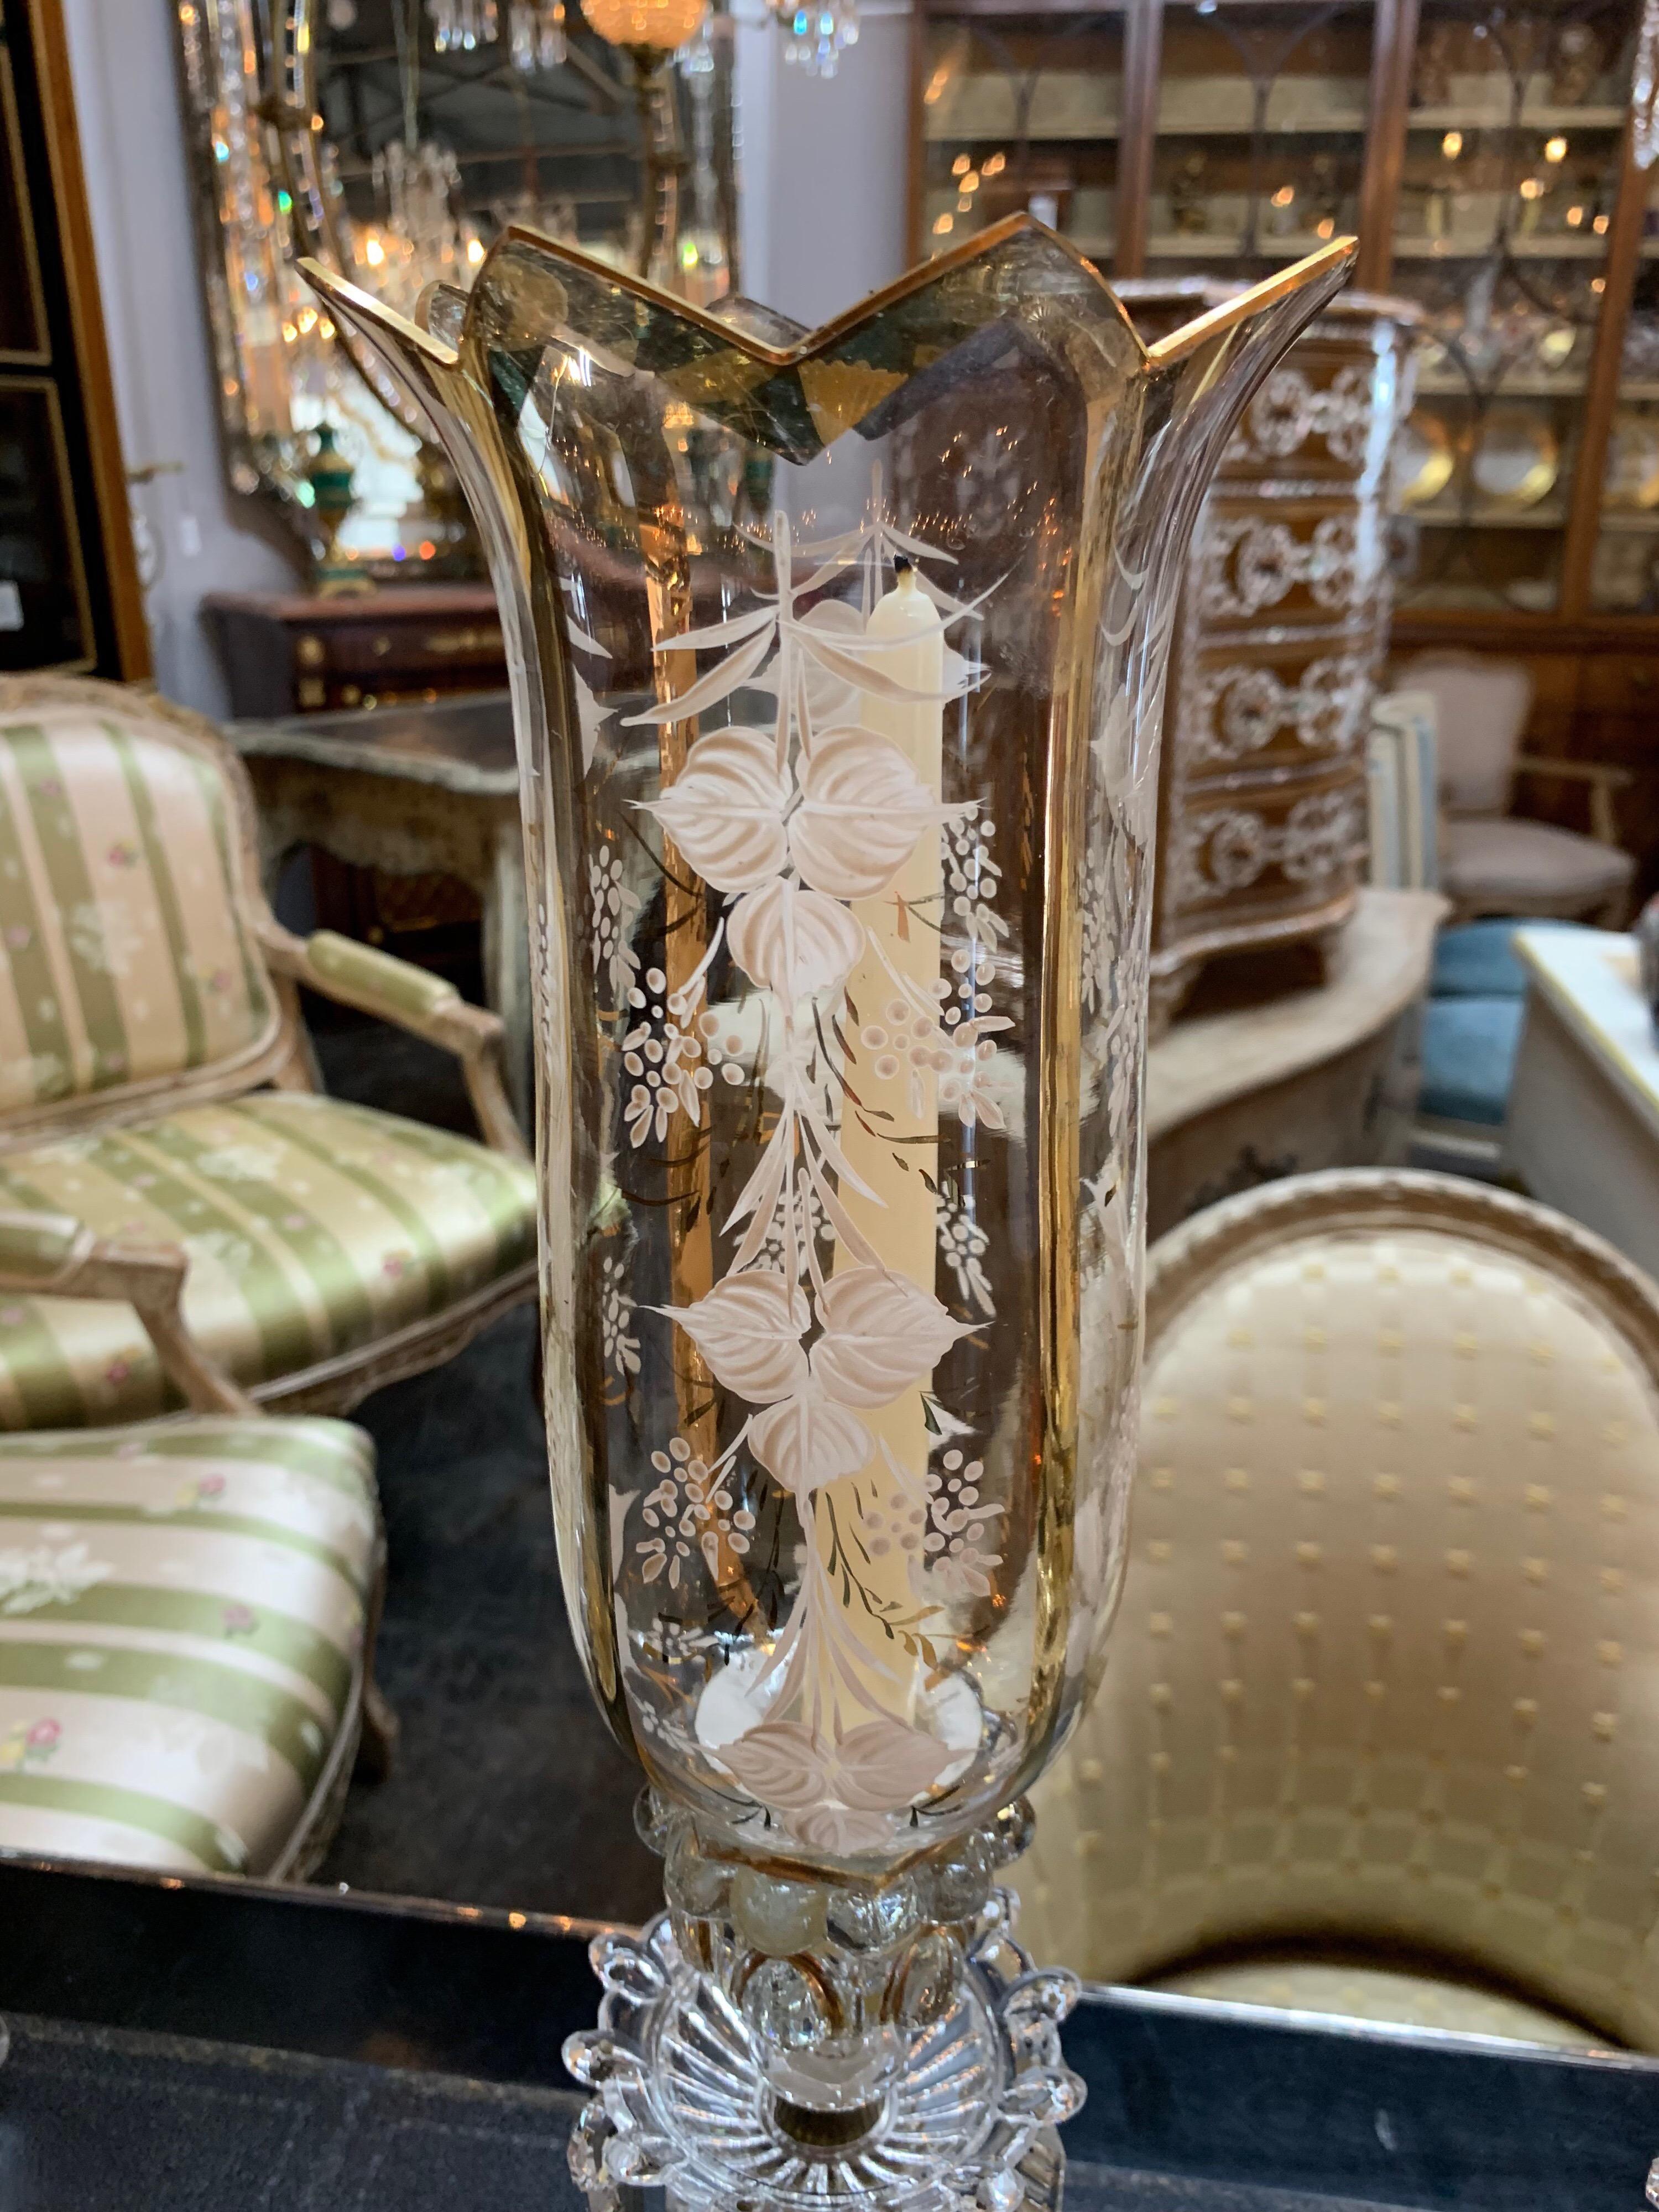 Very nice pair of French Baccarat crystal hurricane lamps with enamel overlay. A beautiful accessory for a fine home.